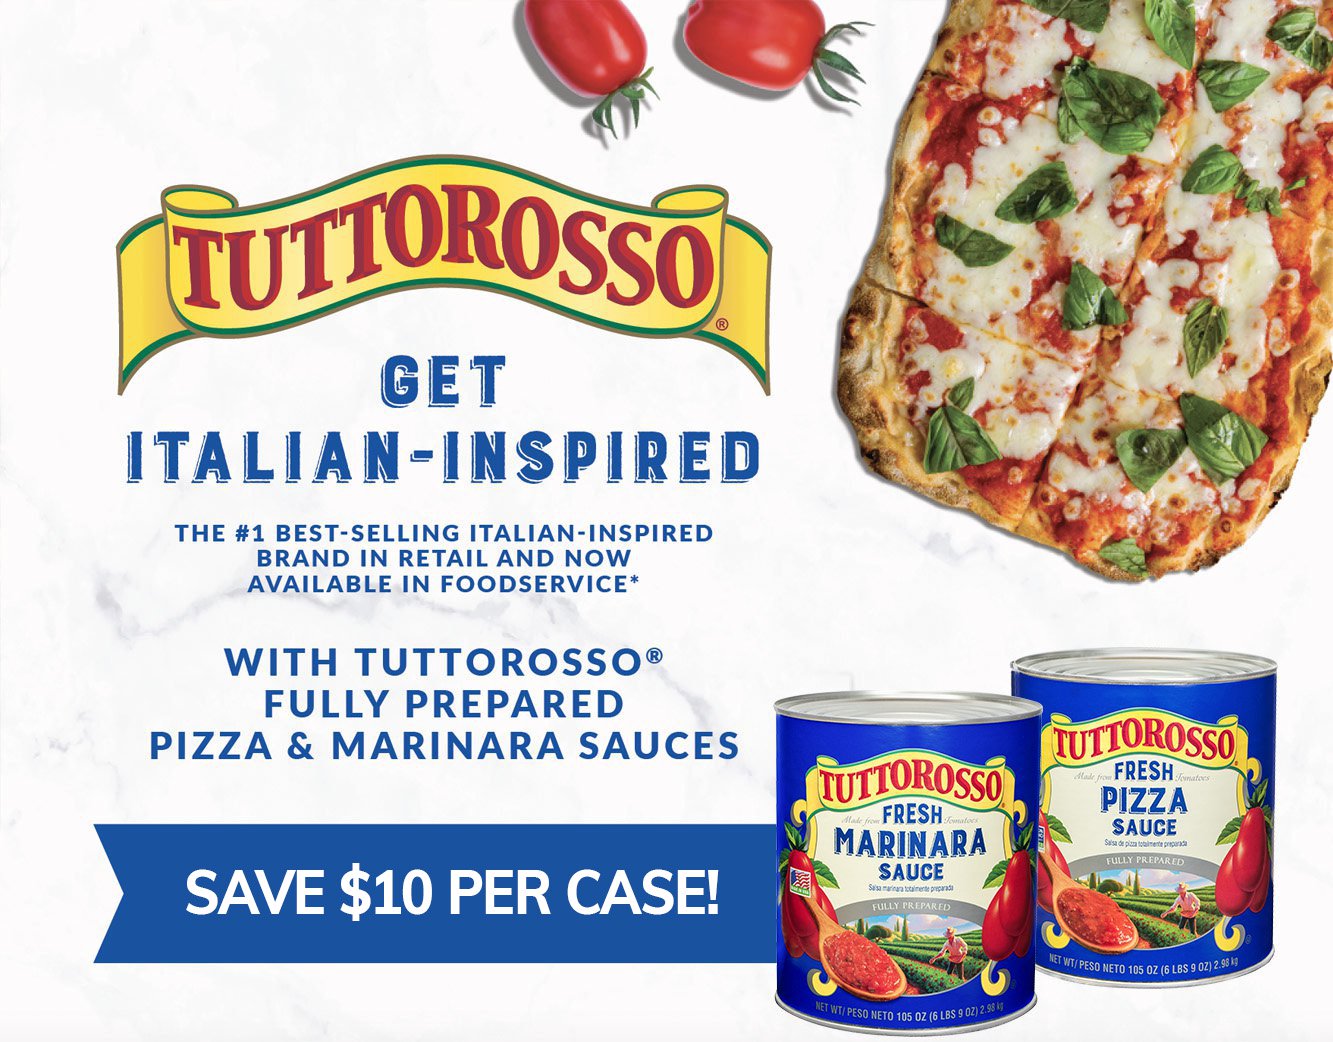 Get Italian-Inspired The #1 best-selling Italian-inspired brand in retail and now available for foodservice. Save $10 per case